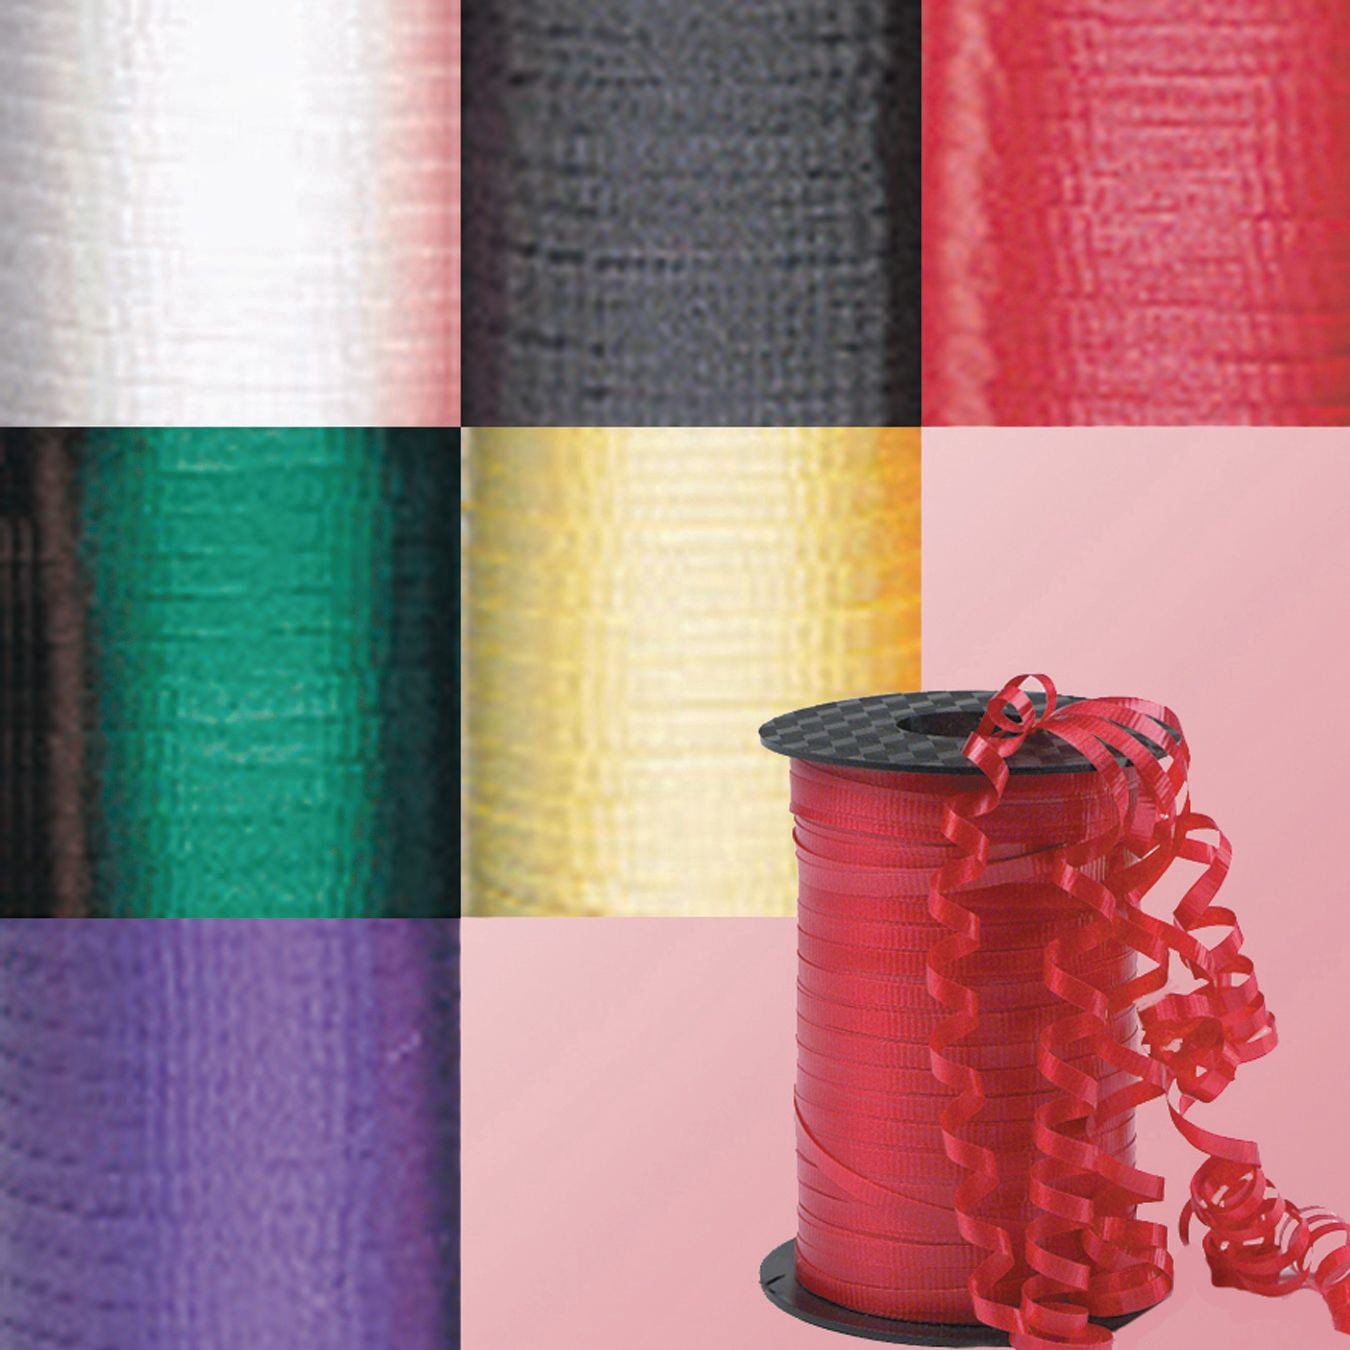 Buy Curling Ribbon Spools for Balloons & More, 500 Yards at S&S Worldwide